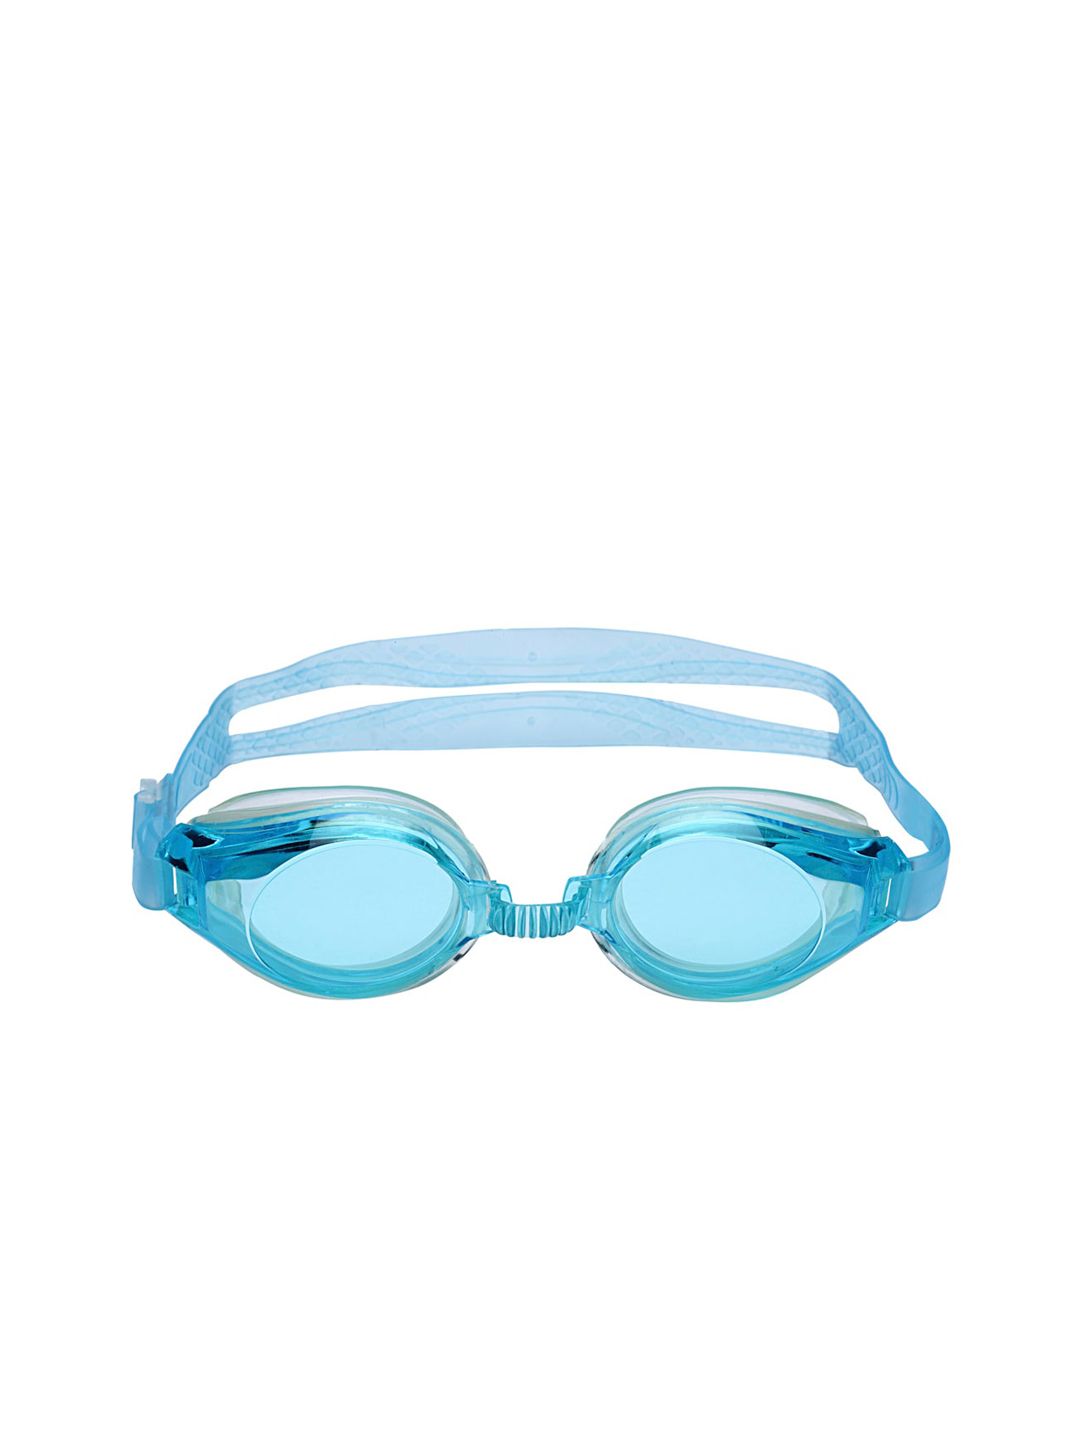 CUKOO Blue Adjustable Swimming Googles Price in India